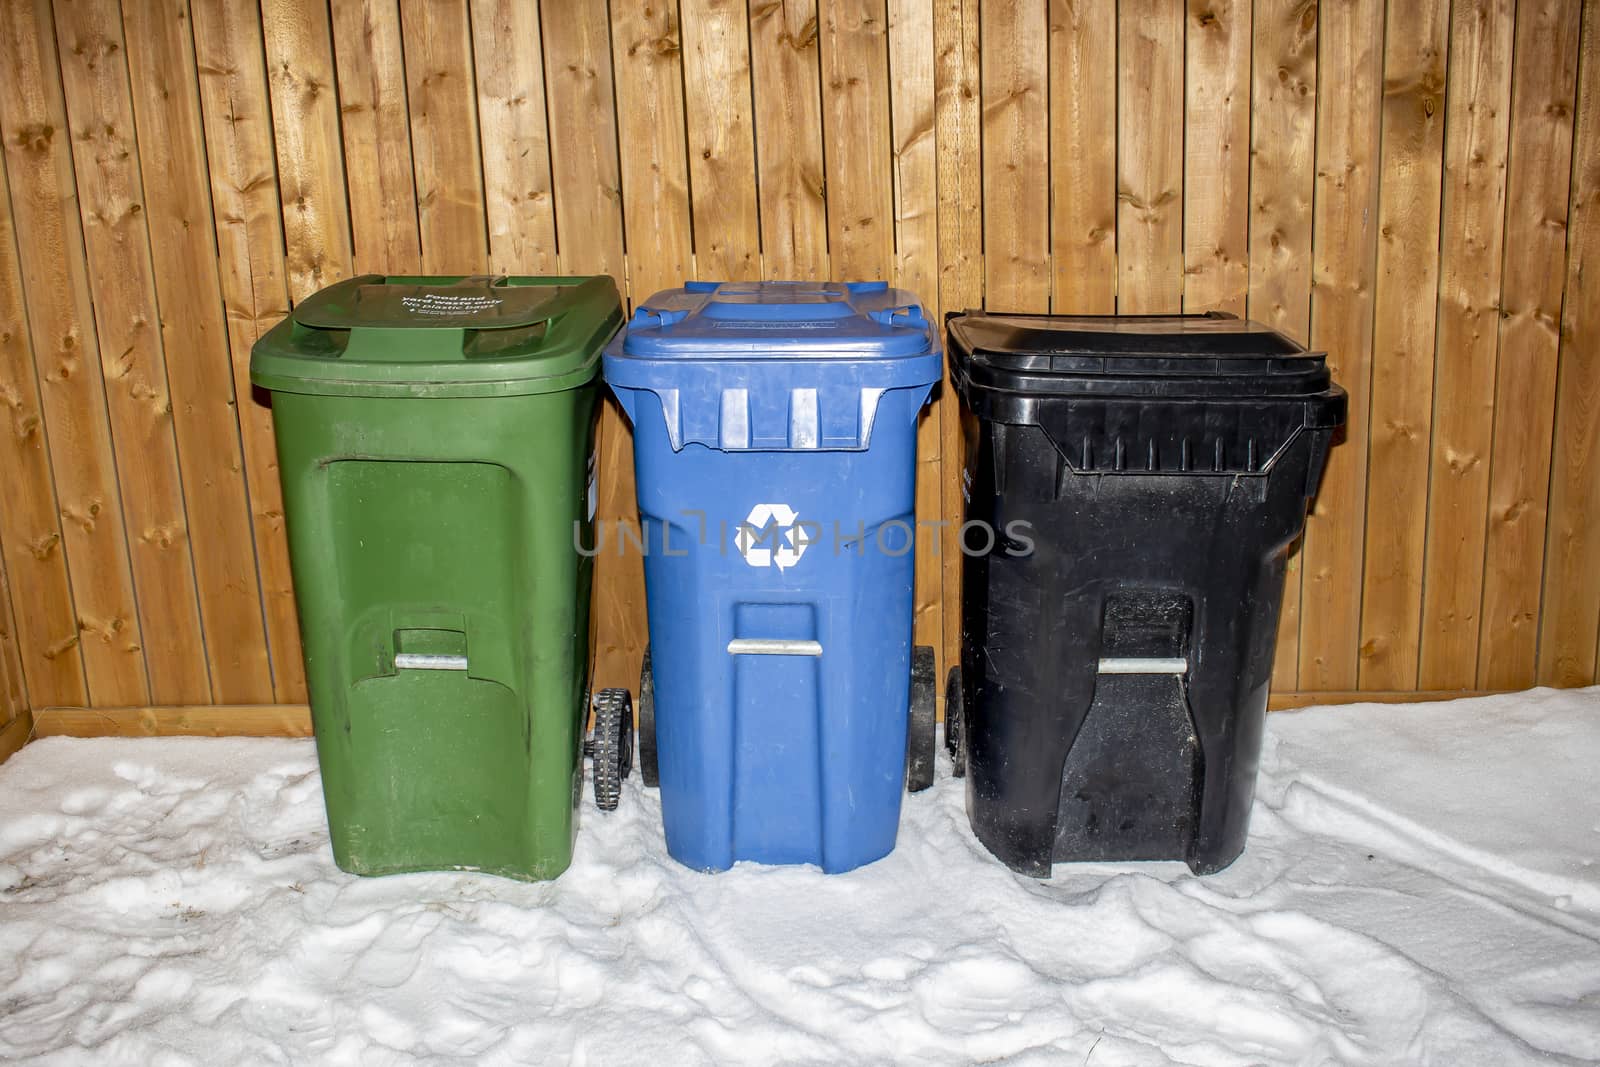 A Green cart for composting, Blue cart for recycling and a black cart for garbage sitting on a back alley during winter